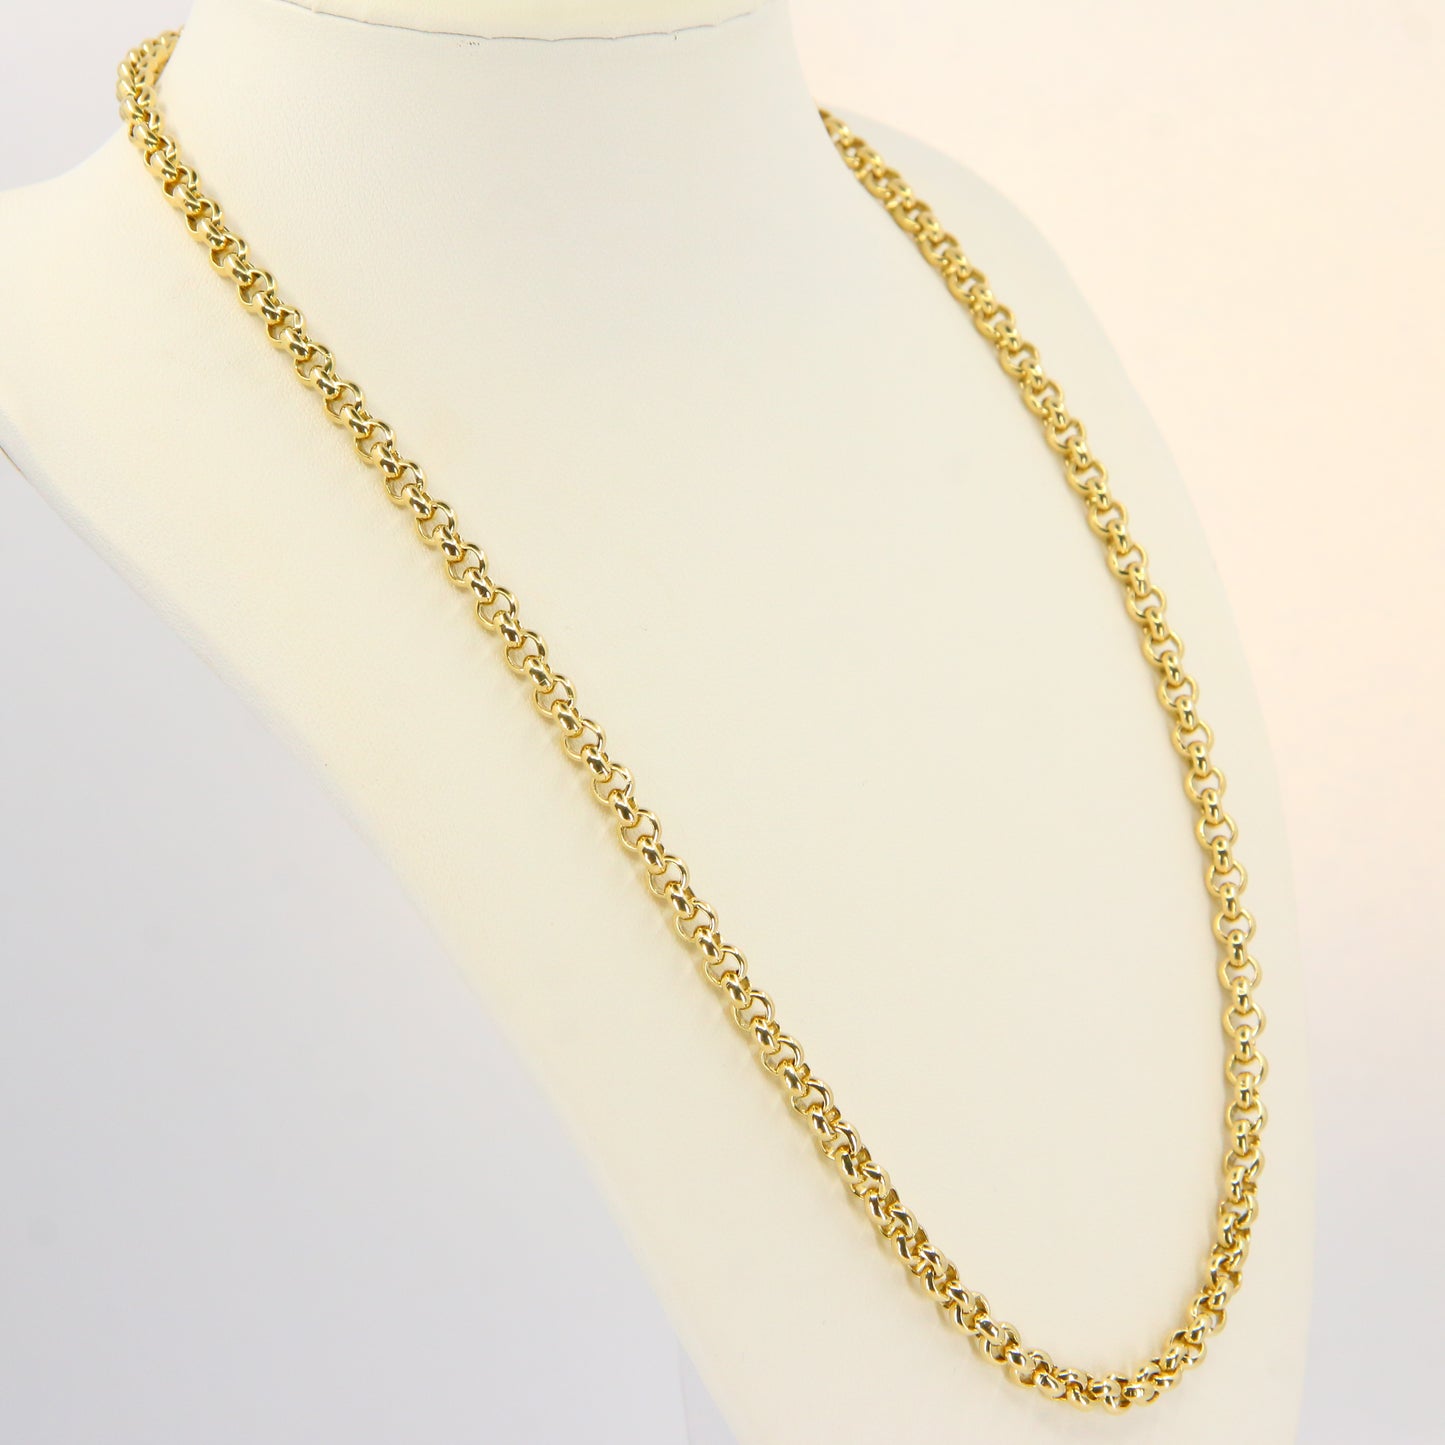 Vintage Hallmarked 9ct Gold Belcher Necklace Cable Link Chain Necklace Boxed